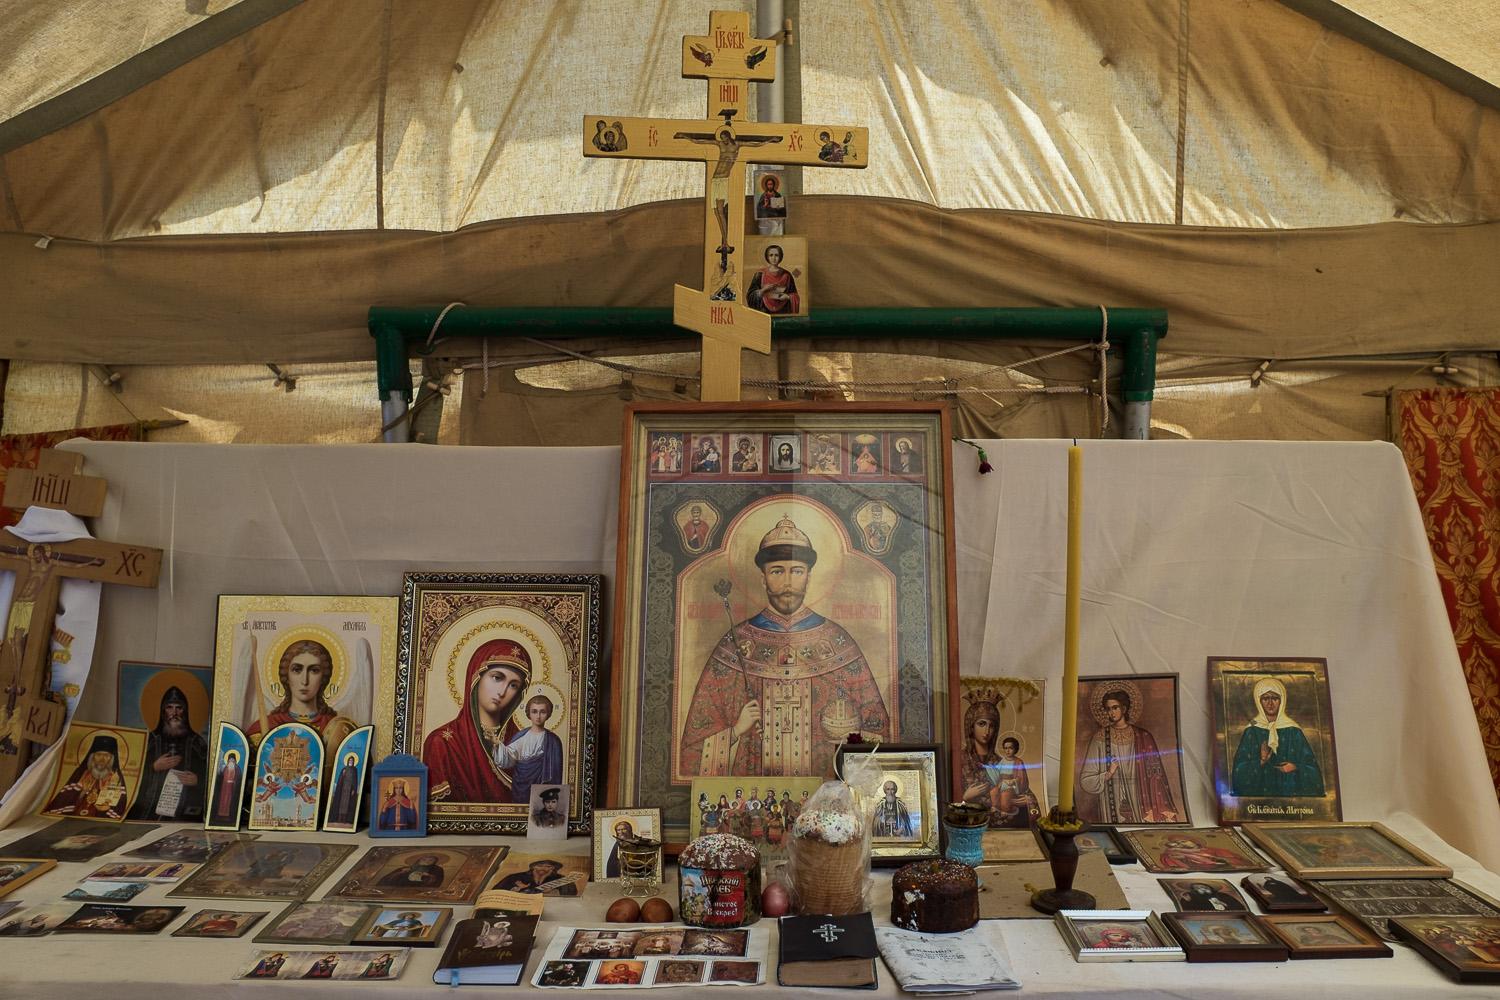  Tsar Nicholas II pictured on an icon in a tent in the main pro-Russian protest camp in Odessa during the 'Euromaidan' uprisings. The camp was destroyed in clashes in May 2014, which left over 40 dead in a fire in the nearby Trade Union House. 